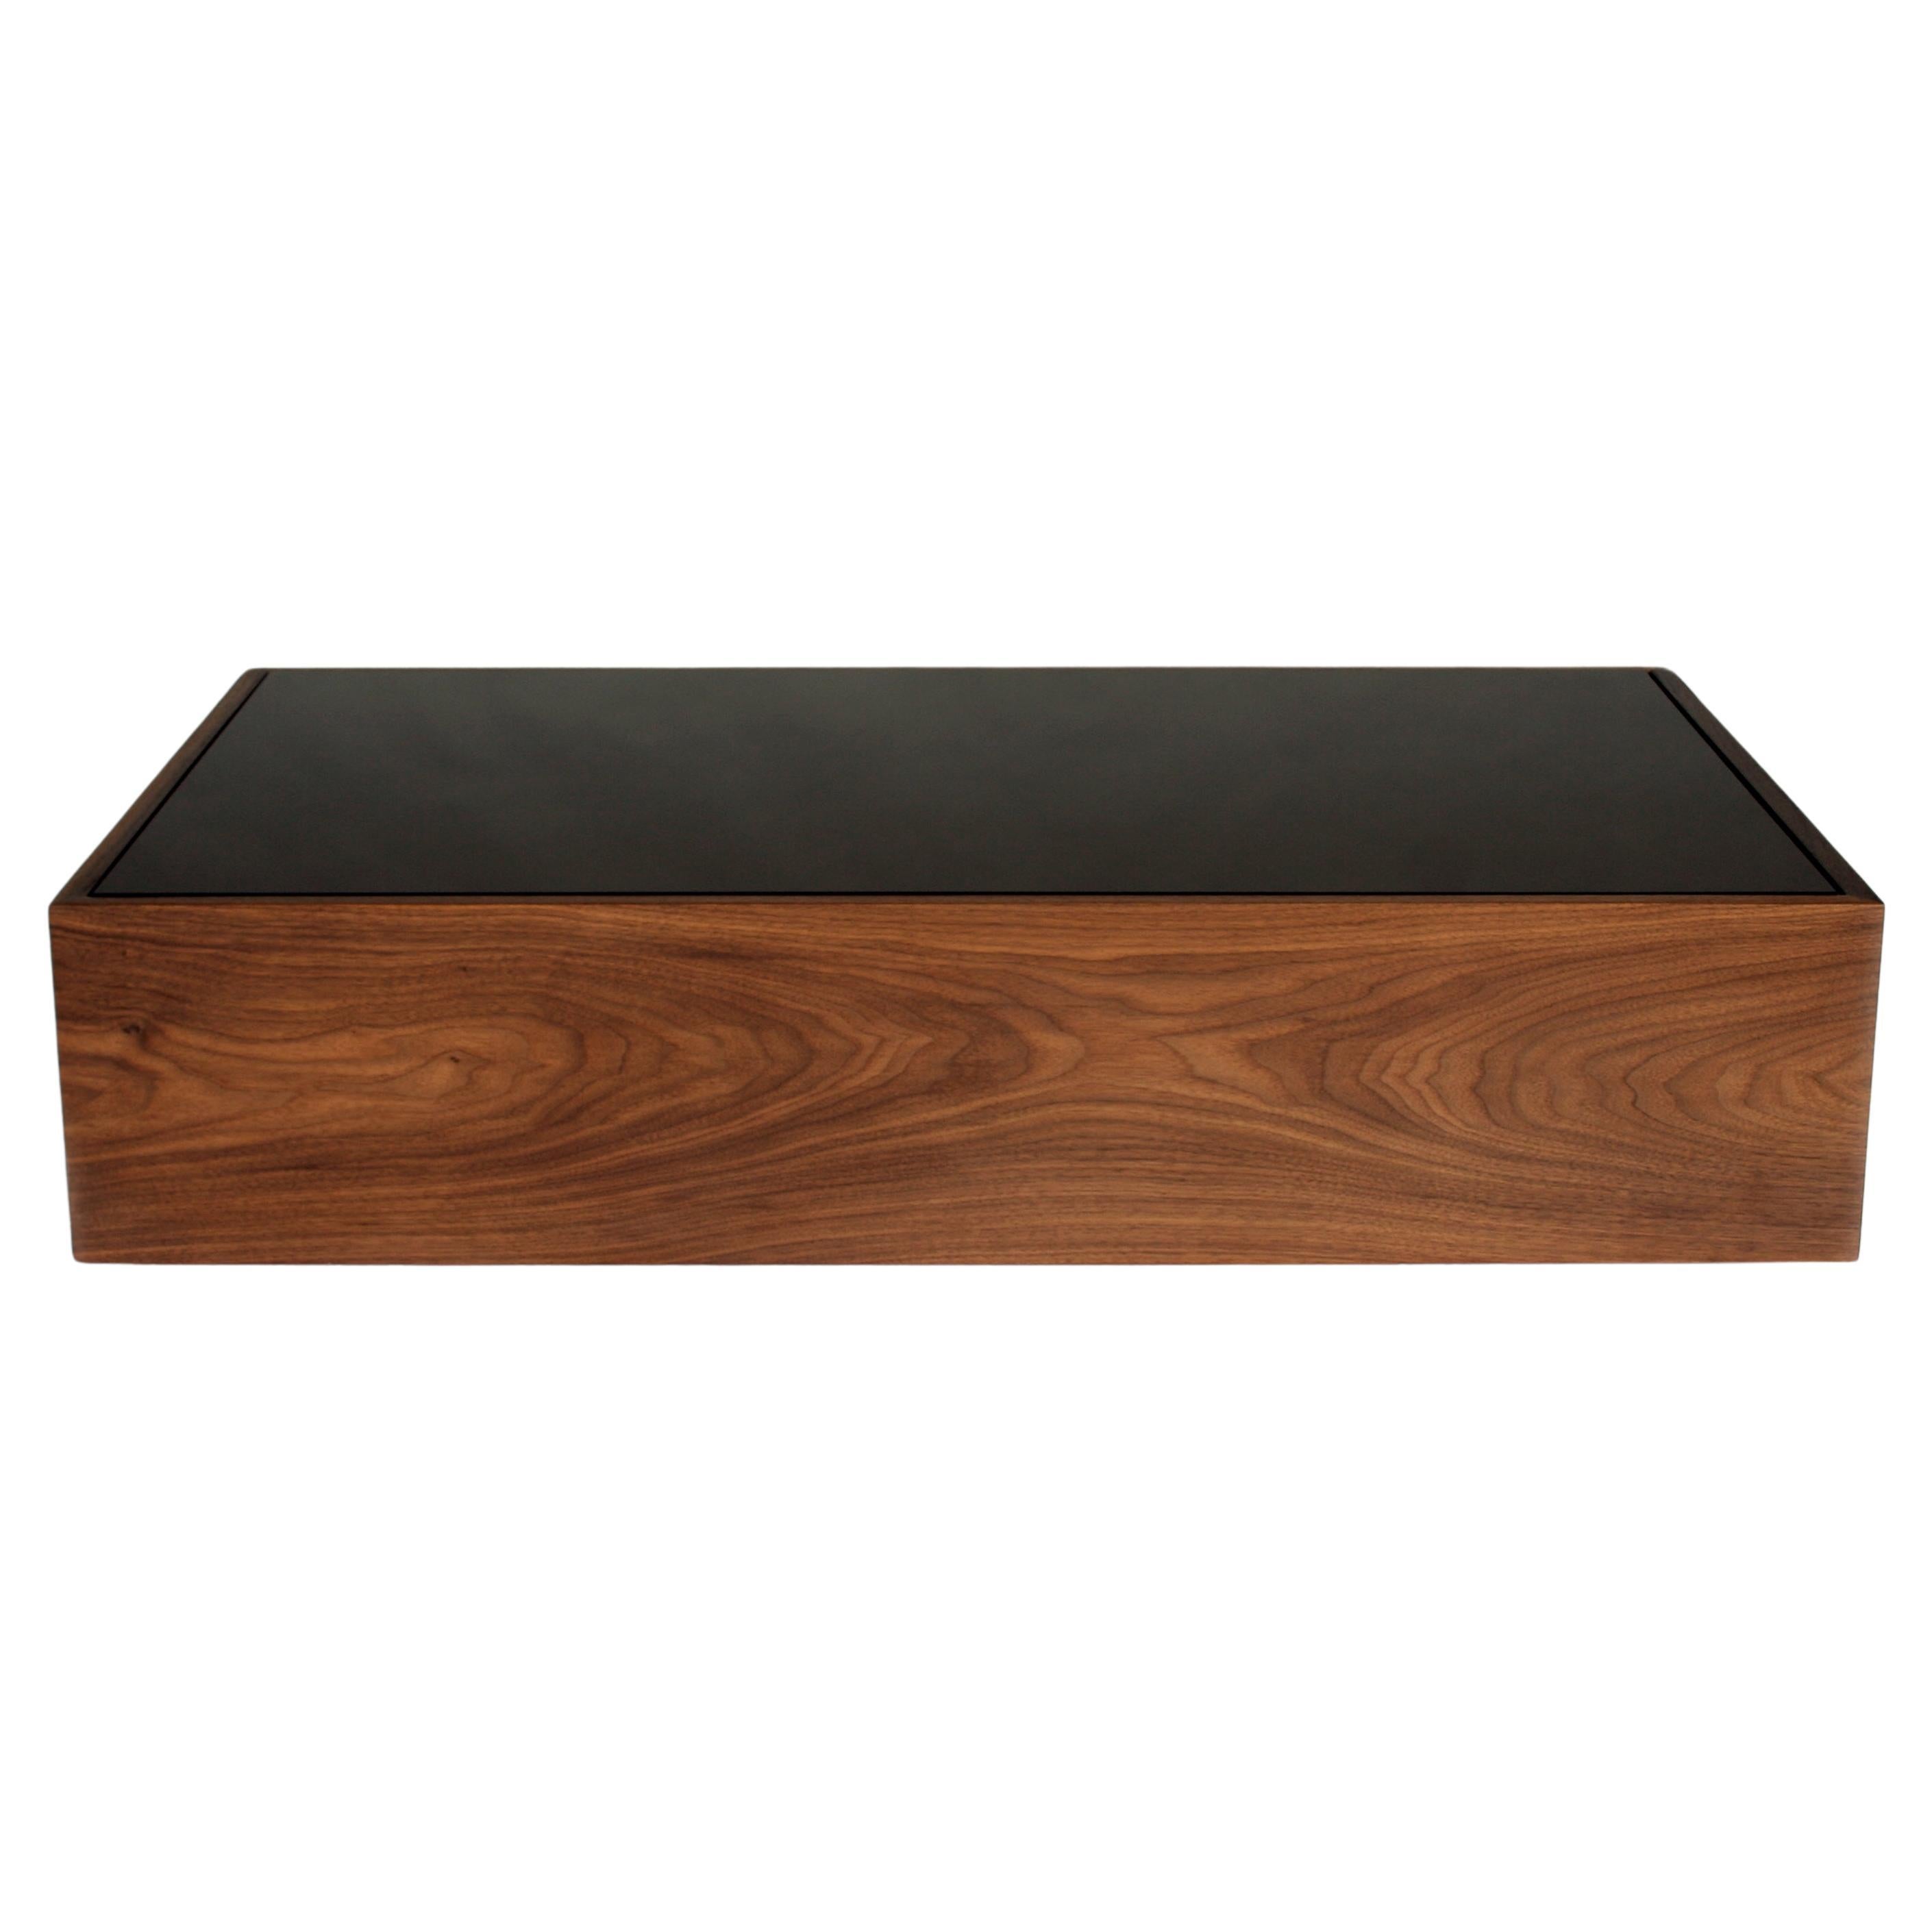 Narcissist Version B Coffee Table by Phase Design